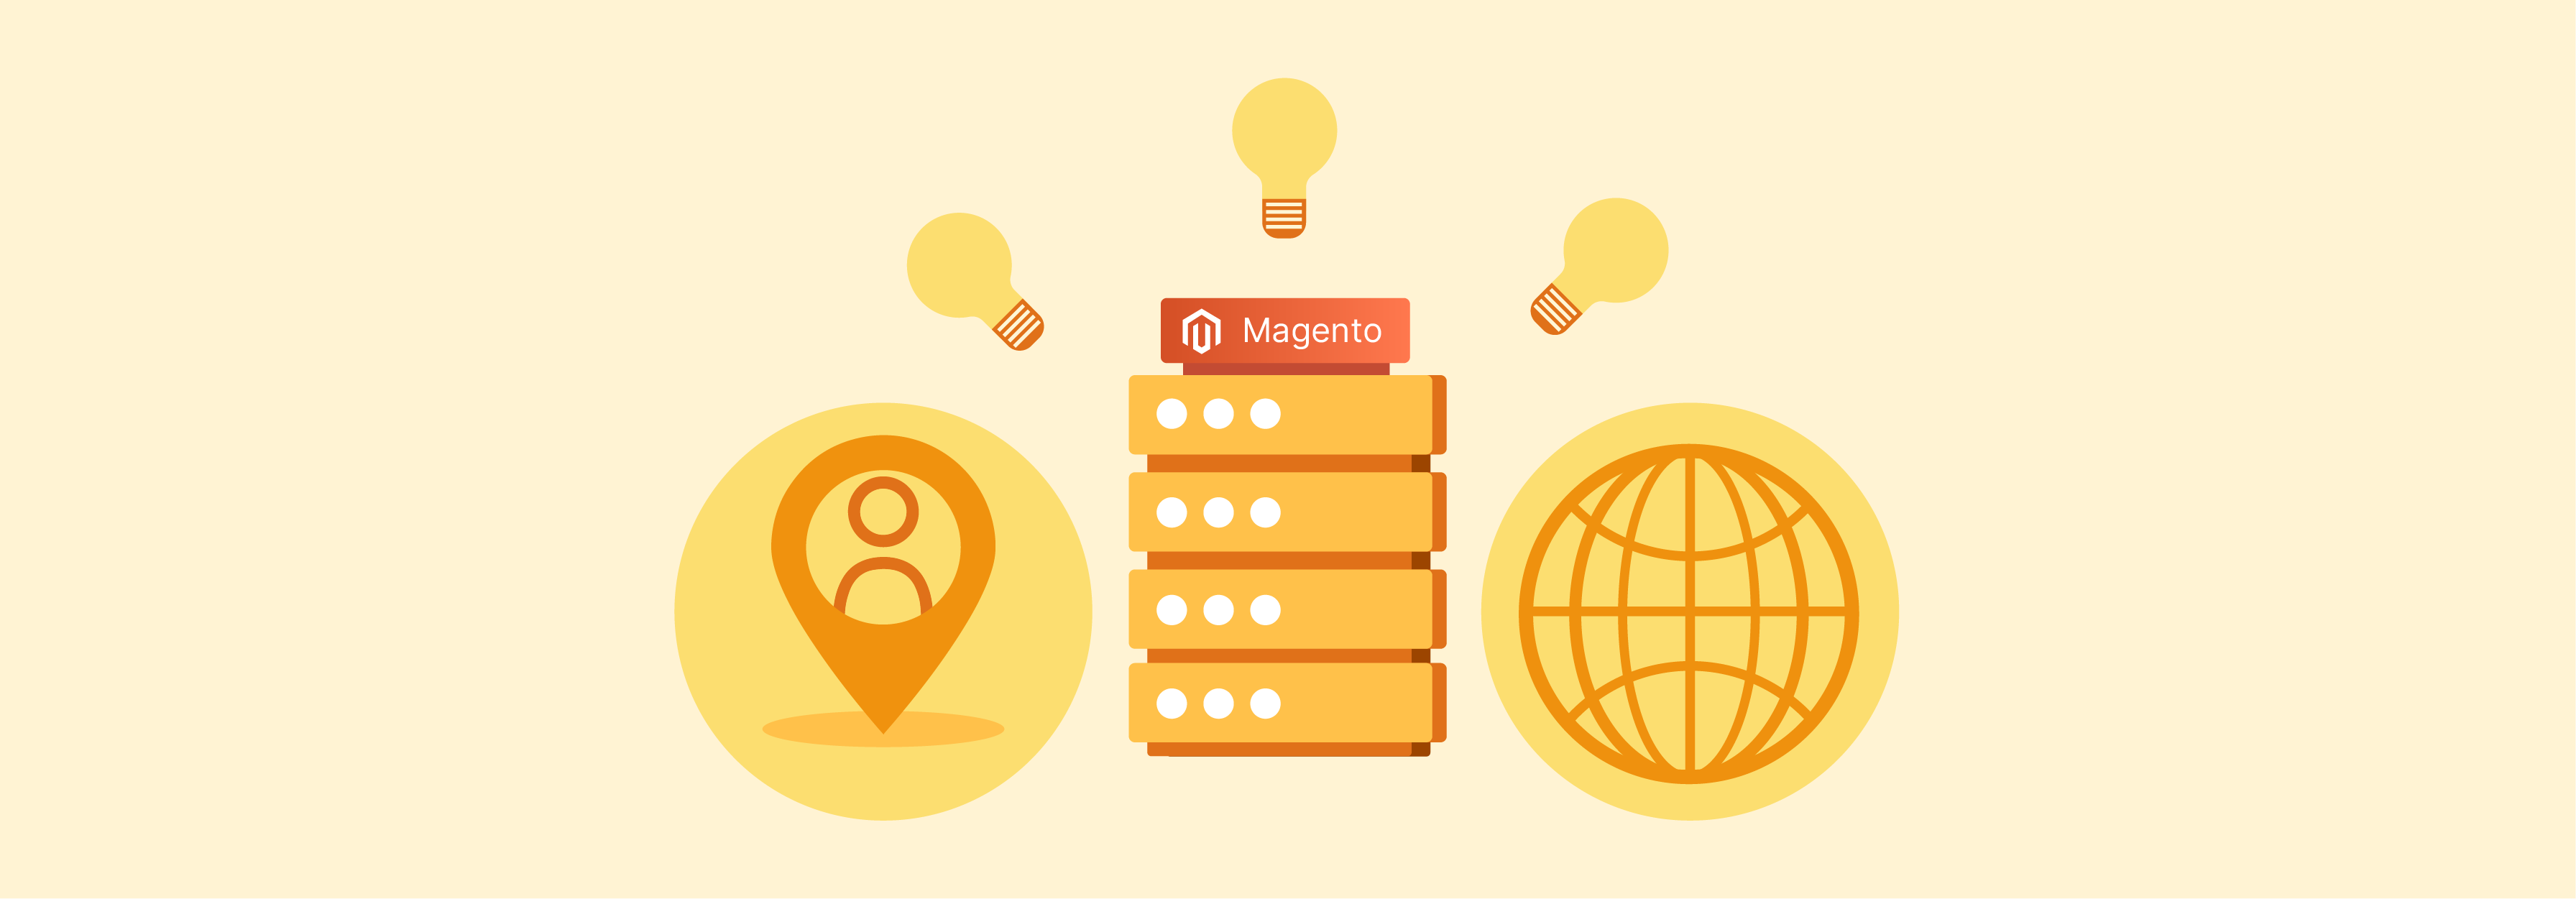 Local and global hosting solutions for Magento in Toronto, offering proximity and worldwide reach